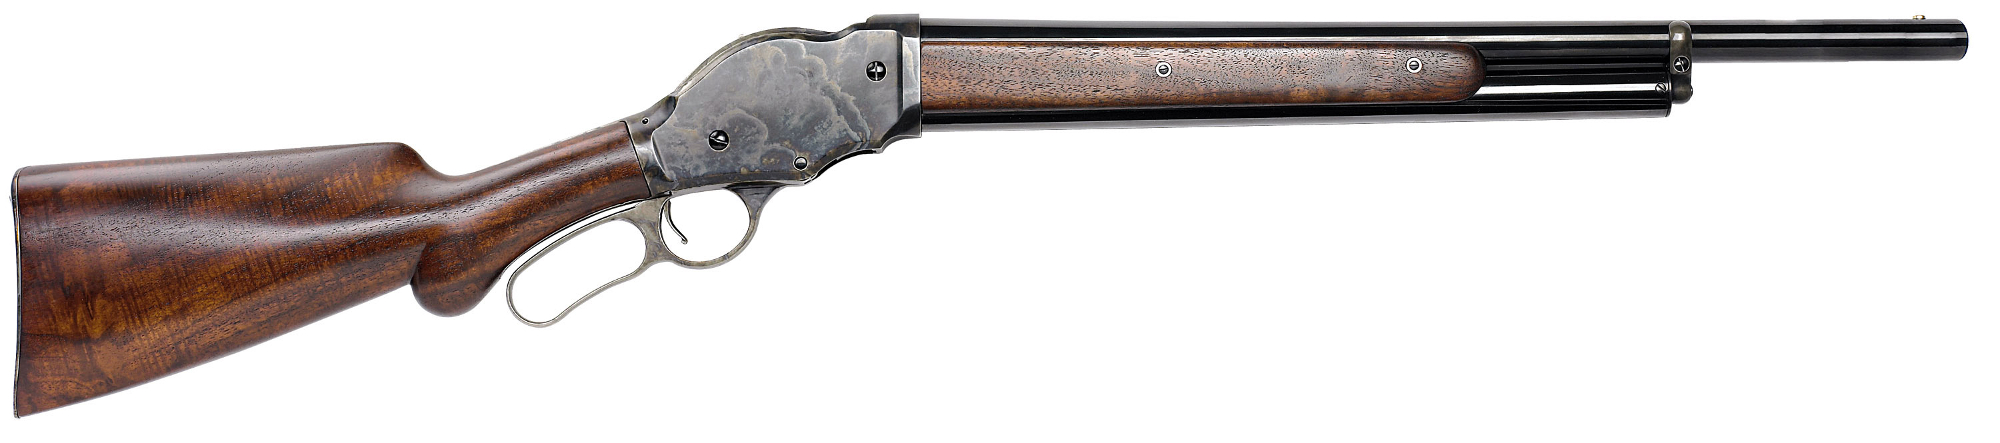 The Chiappa reproduction Model 1887. (Picture courtesy Chiappa).